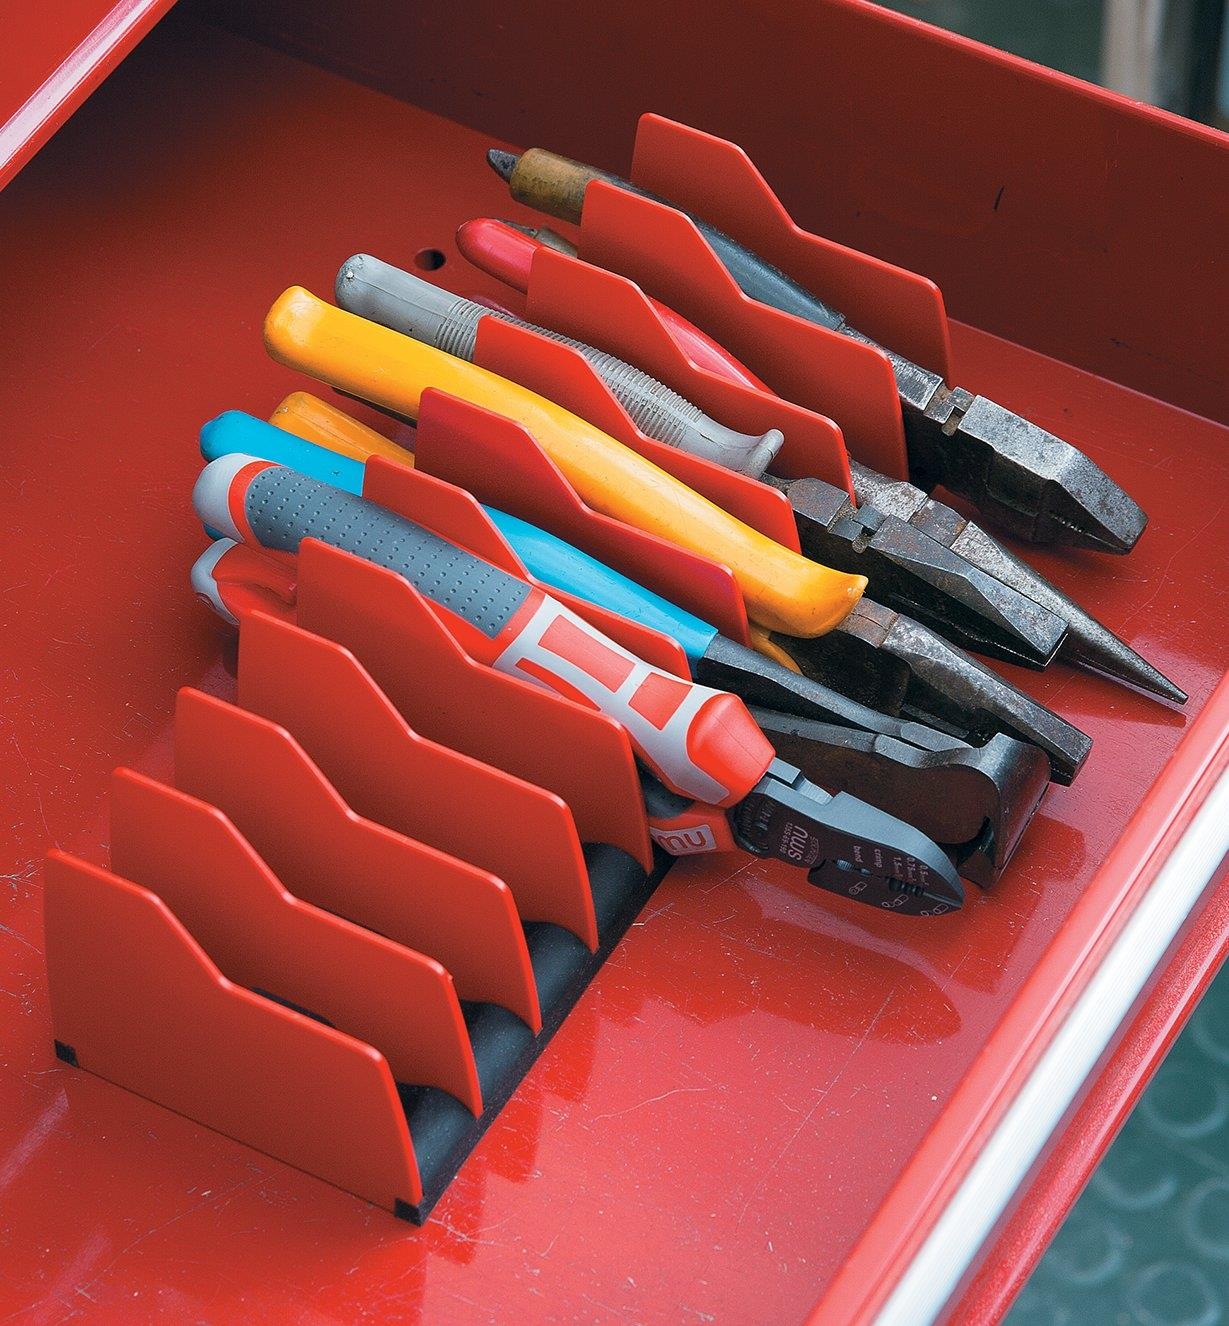 Various plyers held in a Pliers Organizer in a tool drawer